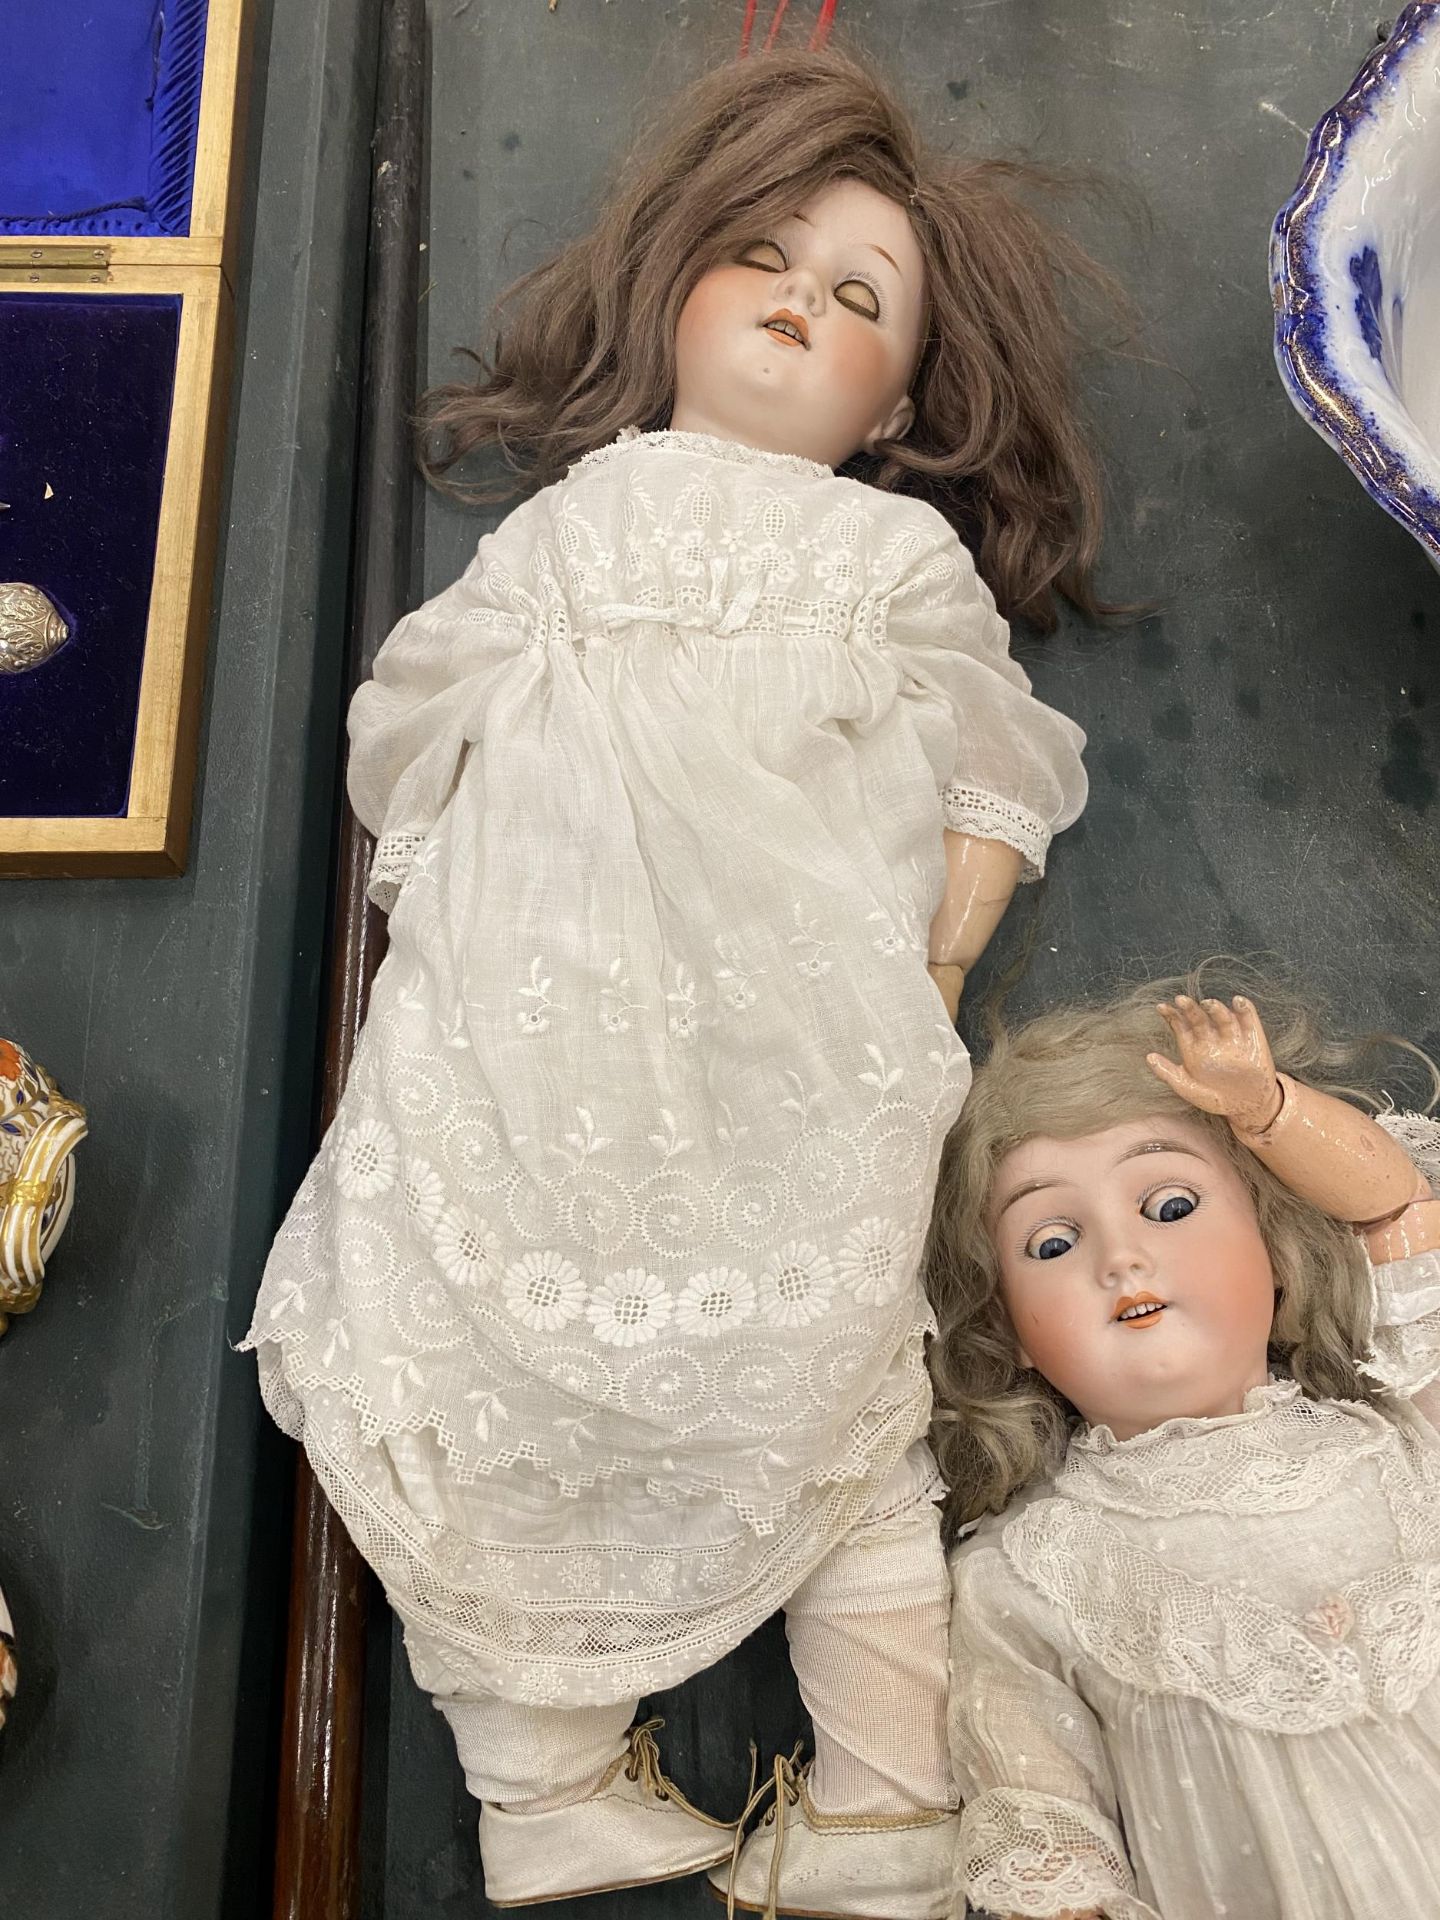 TWO LARGE VINTAGE DOLLS, ONE MARKED MAX HANDWERGY, GERMANY, THE OTHER MARKED HEUBACH KOPPELSDORF - Image 3 of 7